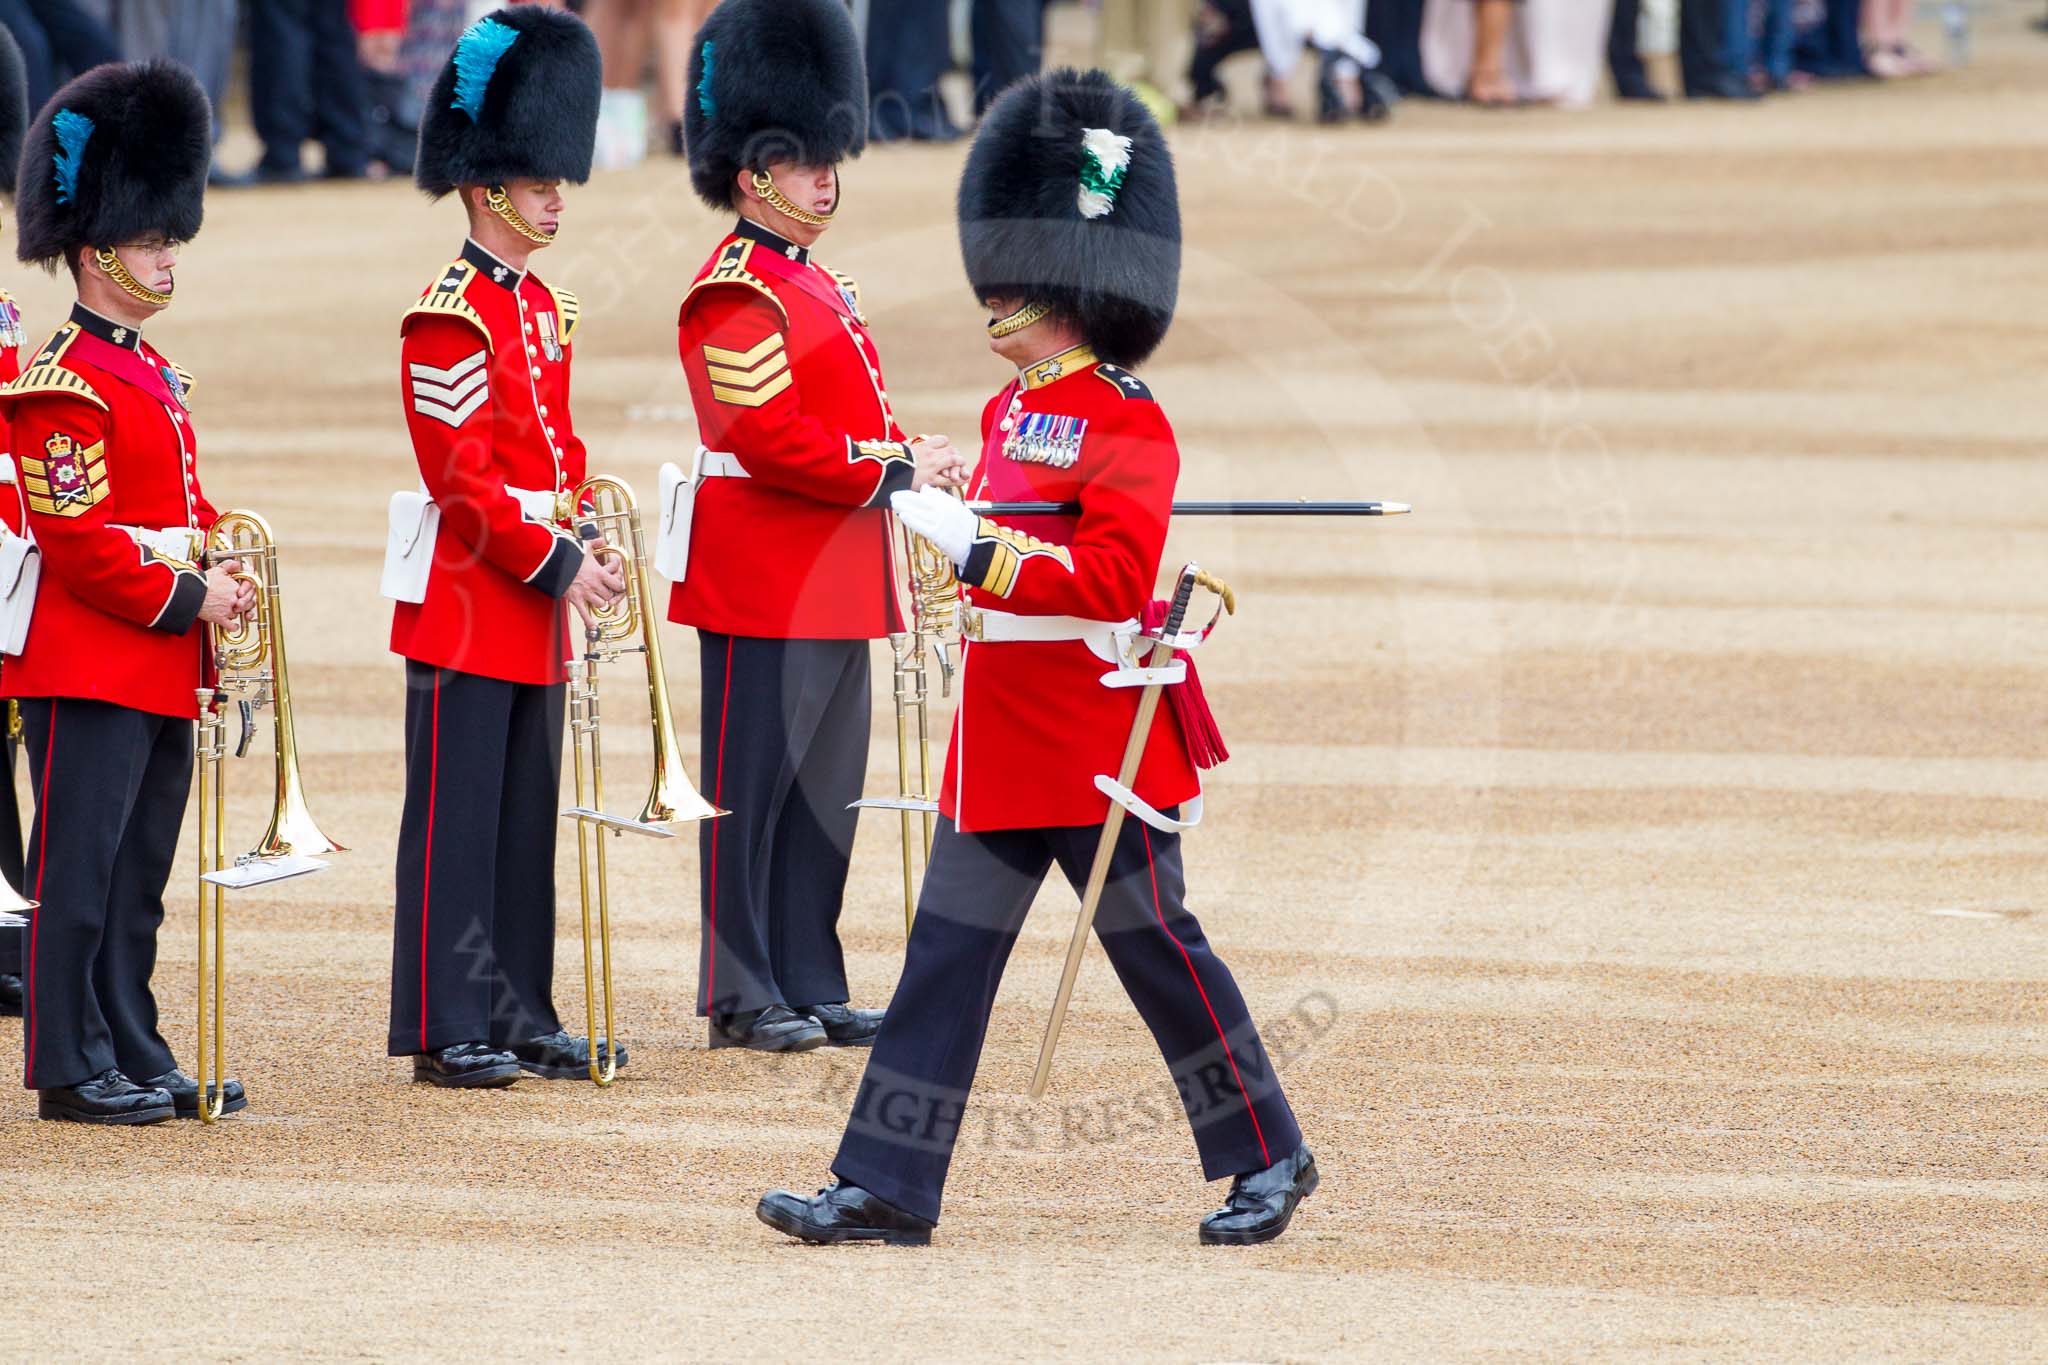 Trooping the Colour 2014.
Horse Guards Parade, Westminster,
London SW1A,

United Kingdom,
on 14 June 2014 at 10:20, image #114